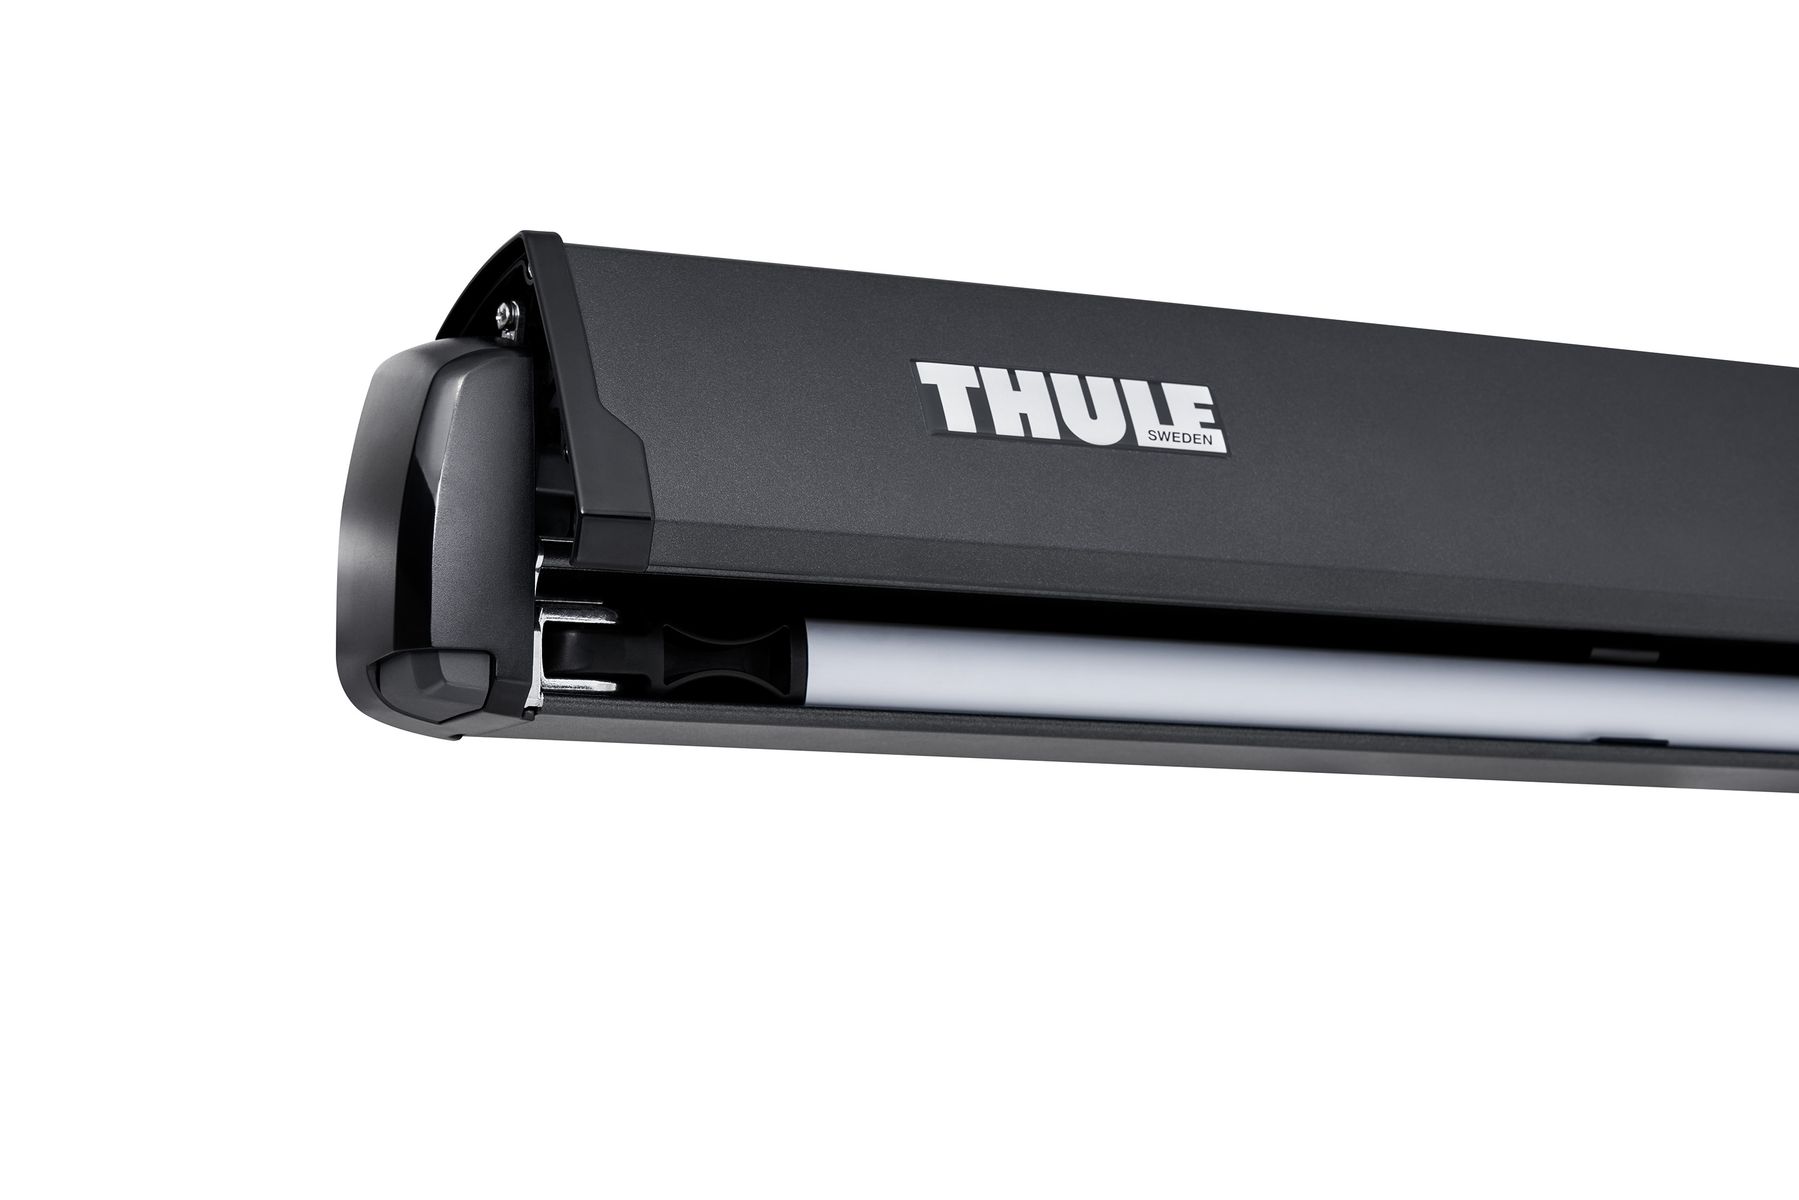 Thule 3200 - Roll-up box Awning 2.50m Anodised Gray